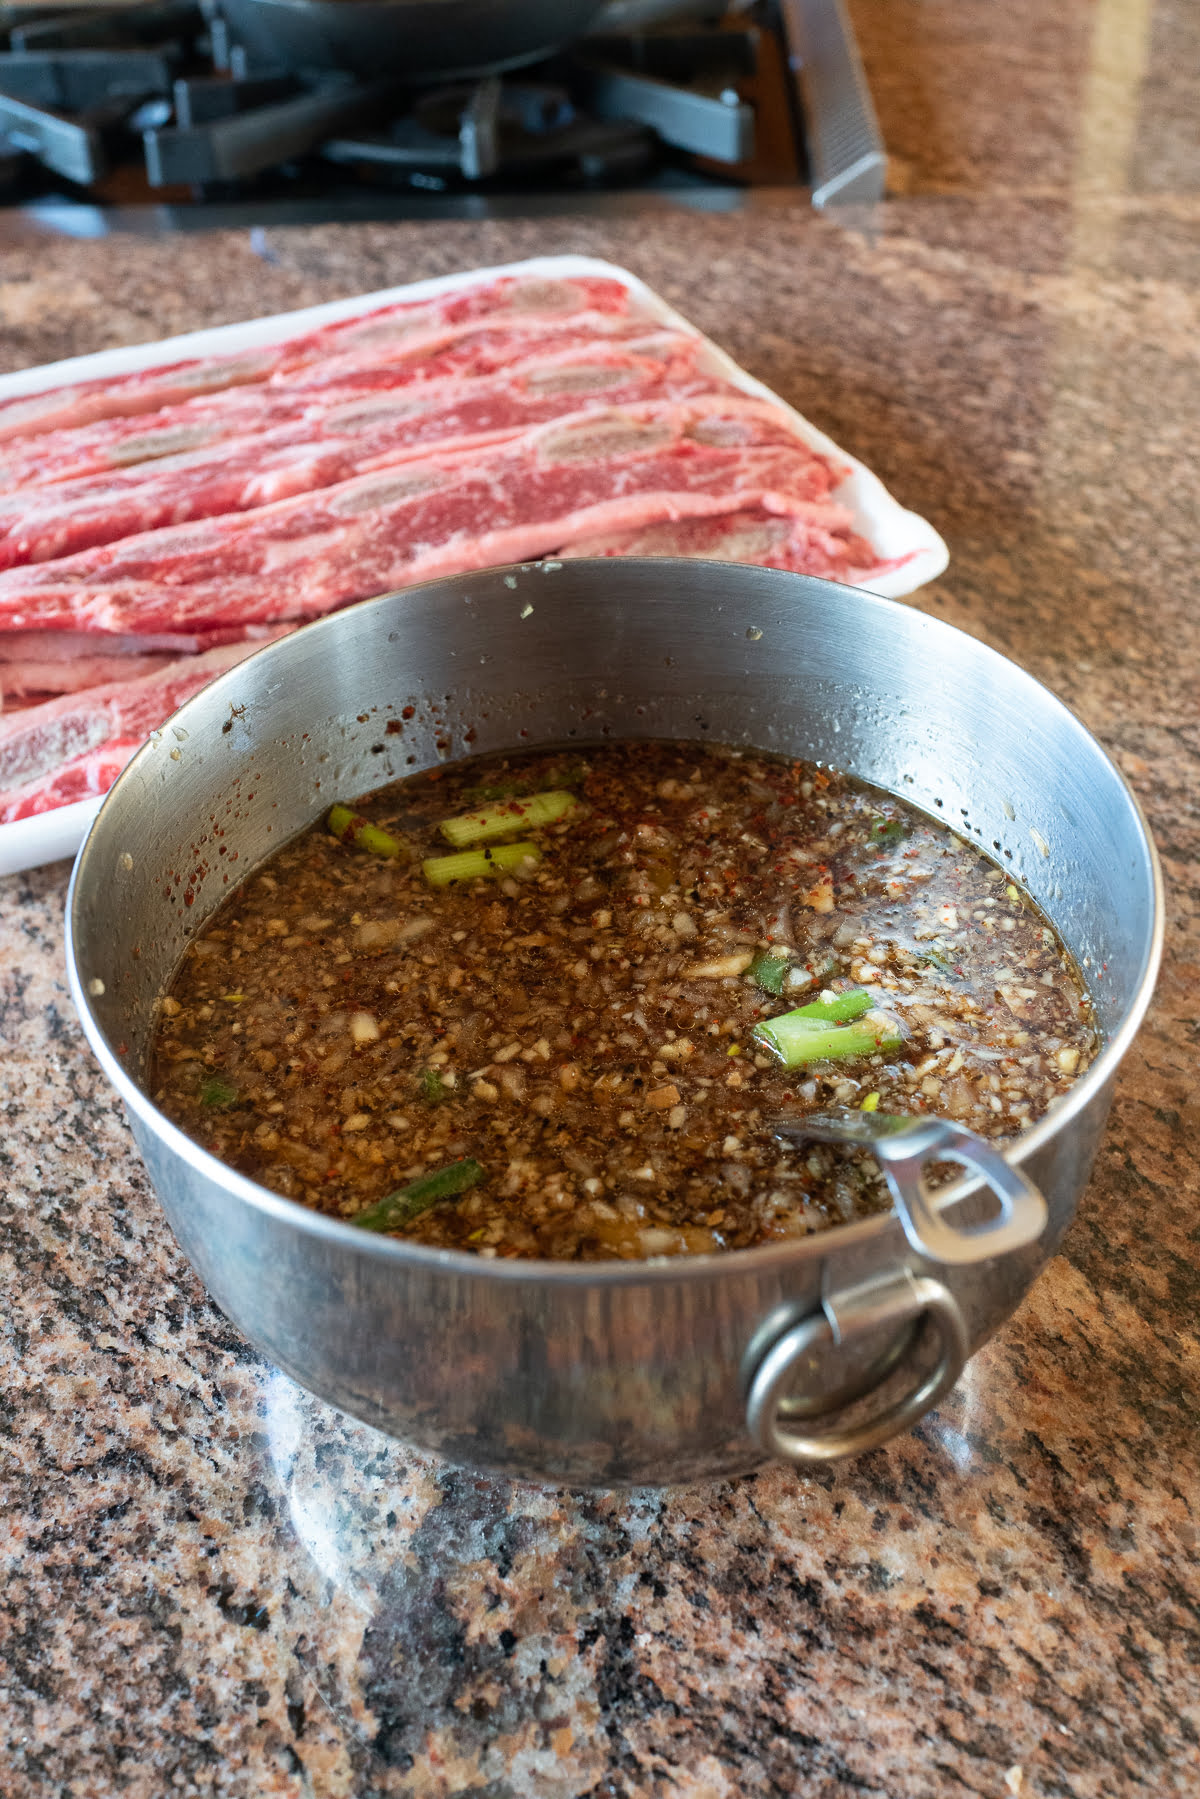 A bowl of the marinade sauce for the kalbi.